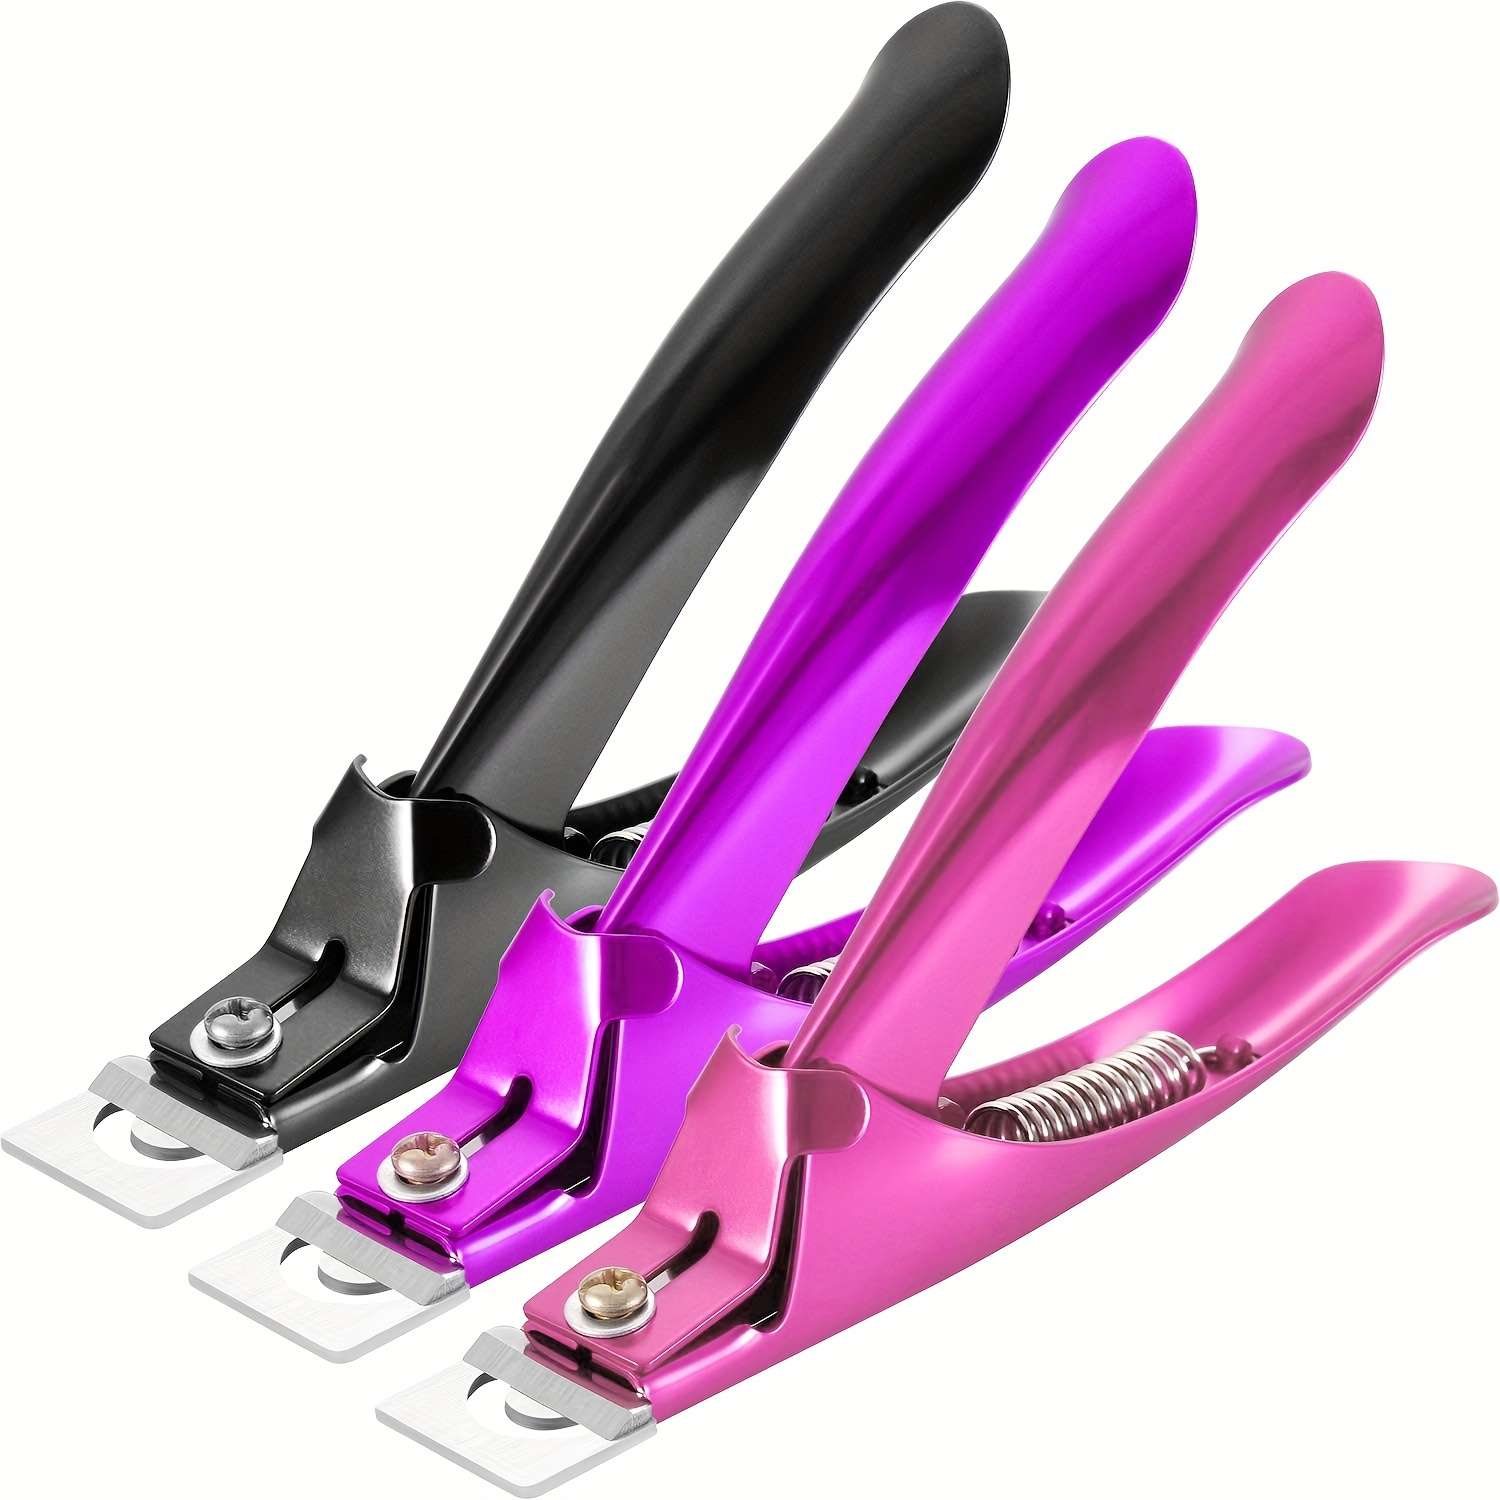 Frcolor Stainless Steel Nail Tip Clipper Acrylic Art Manicure U-Shape  Scissors Tips Cutter Trimmers